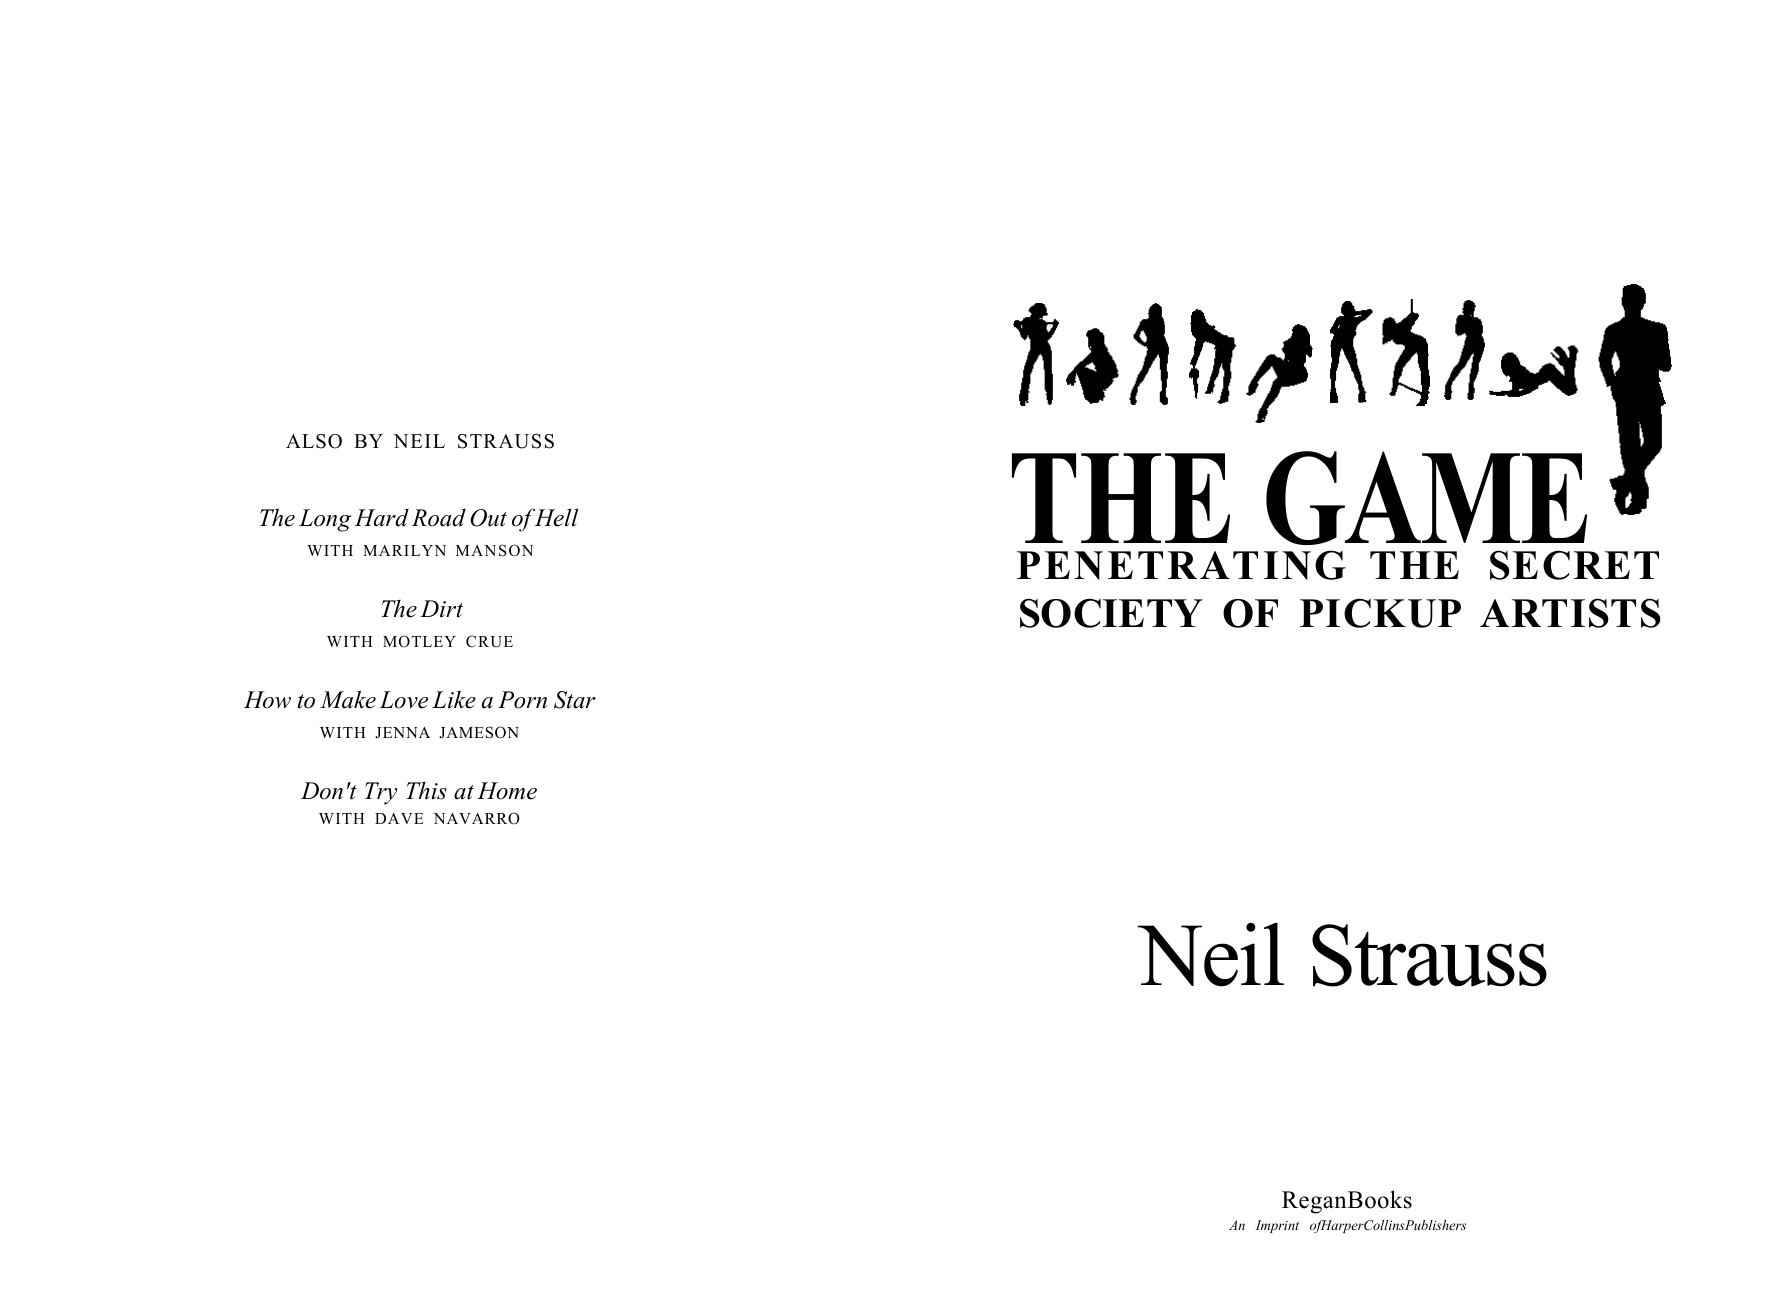 THE GAME by Neil Strauss